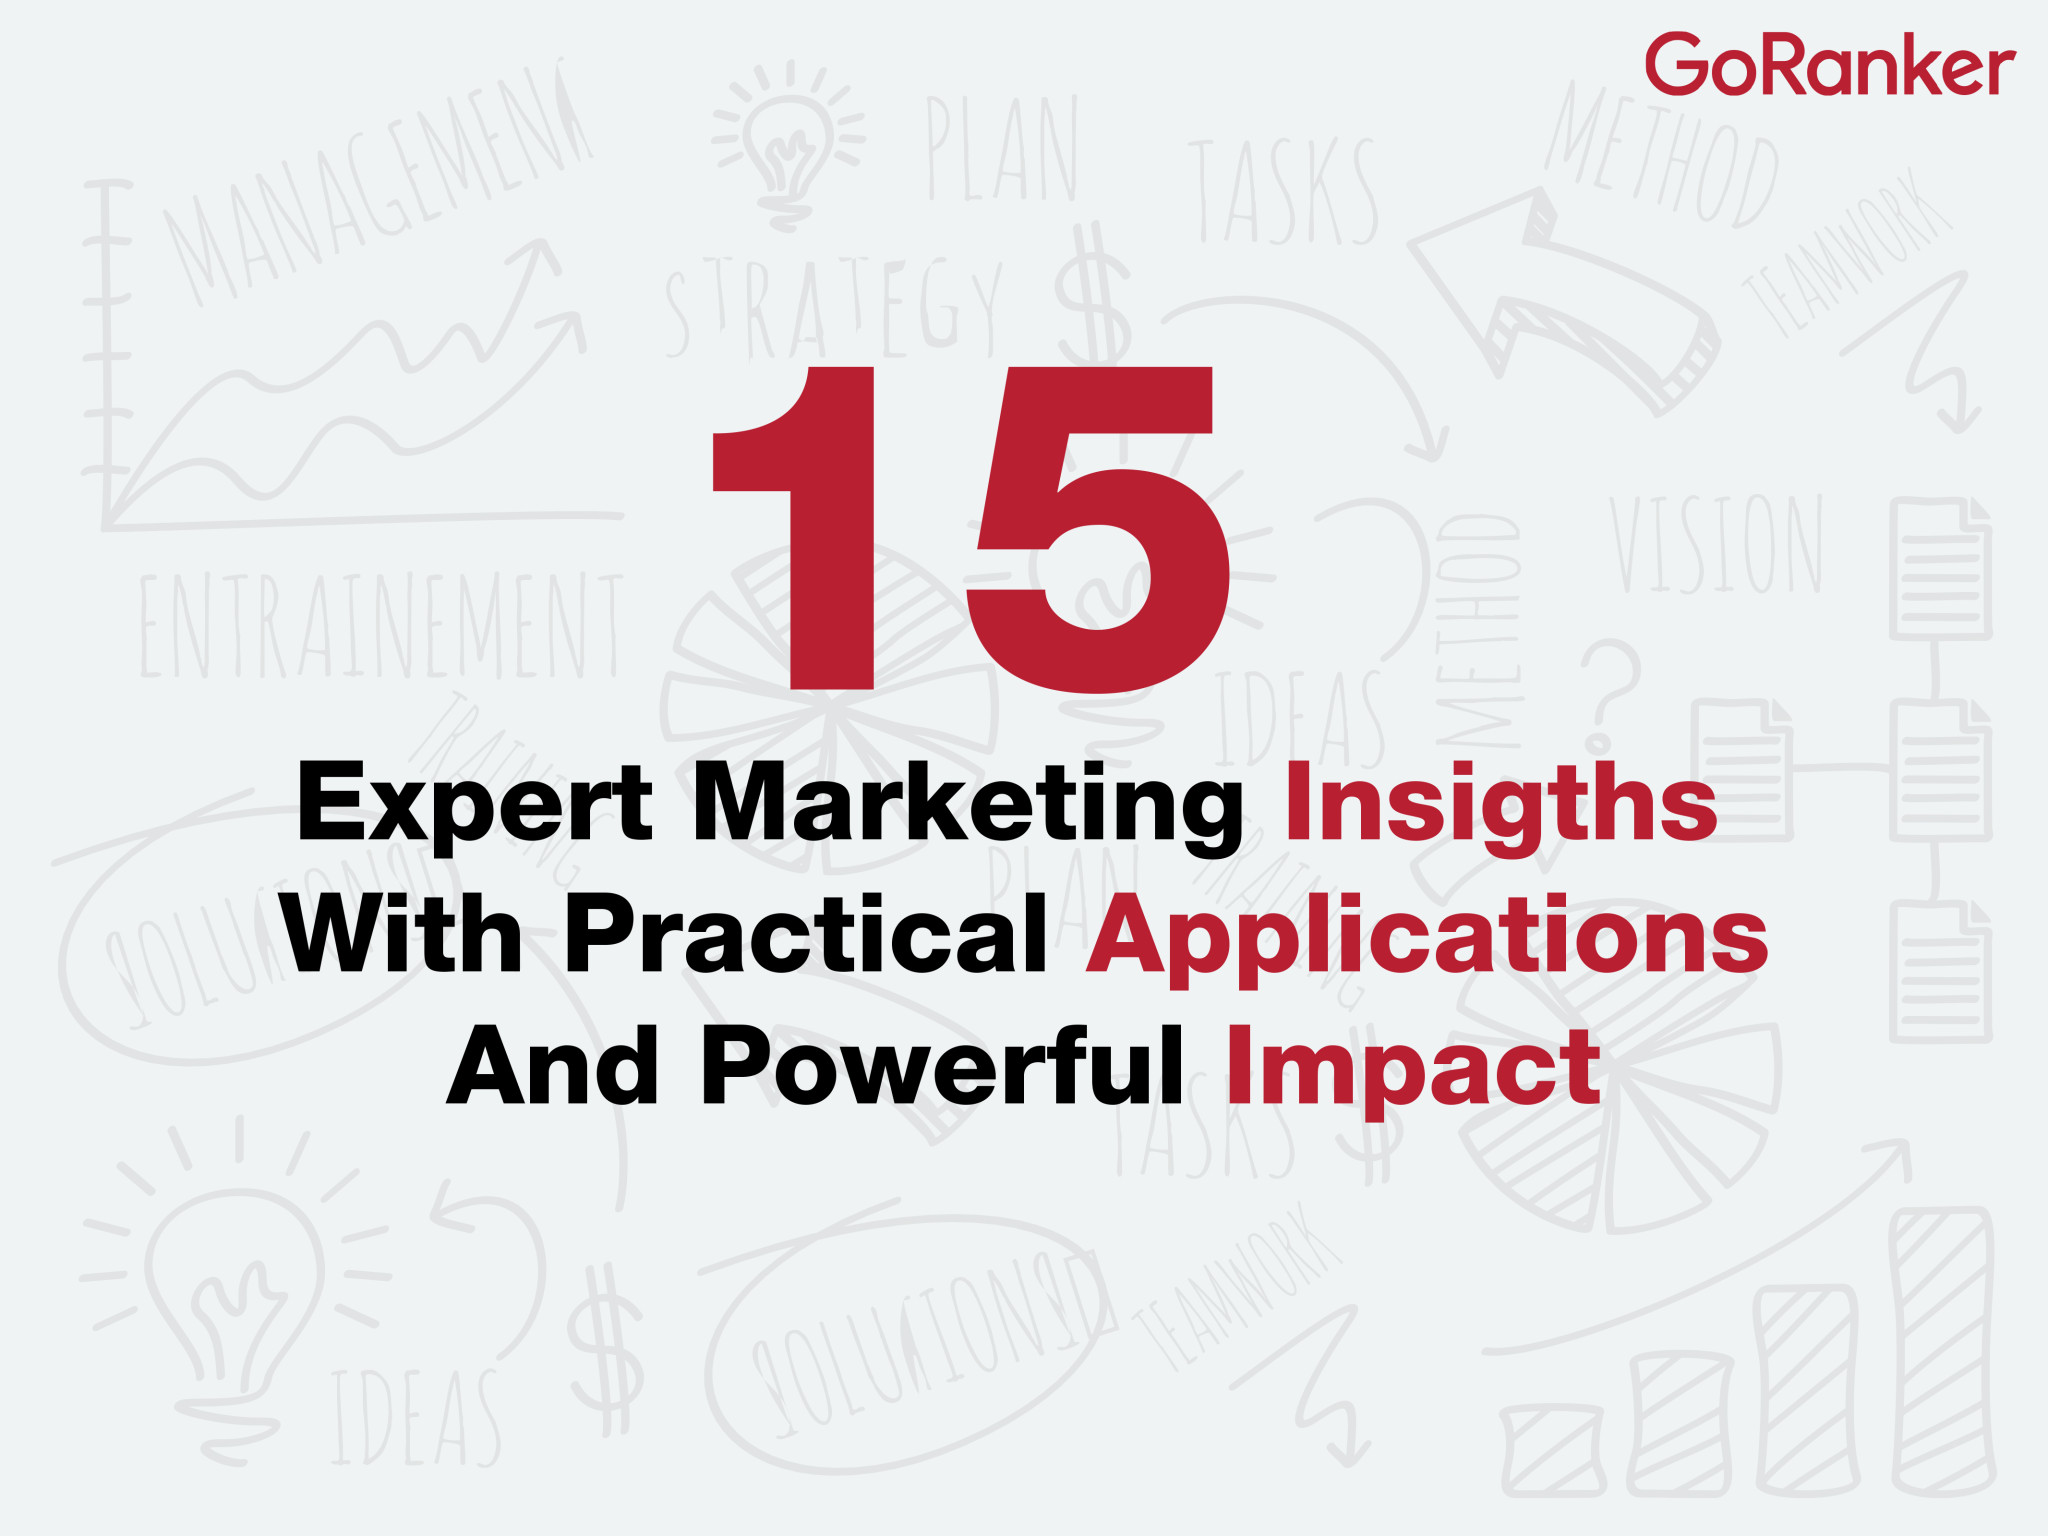 expert marketing insights with practical applications